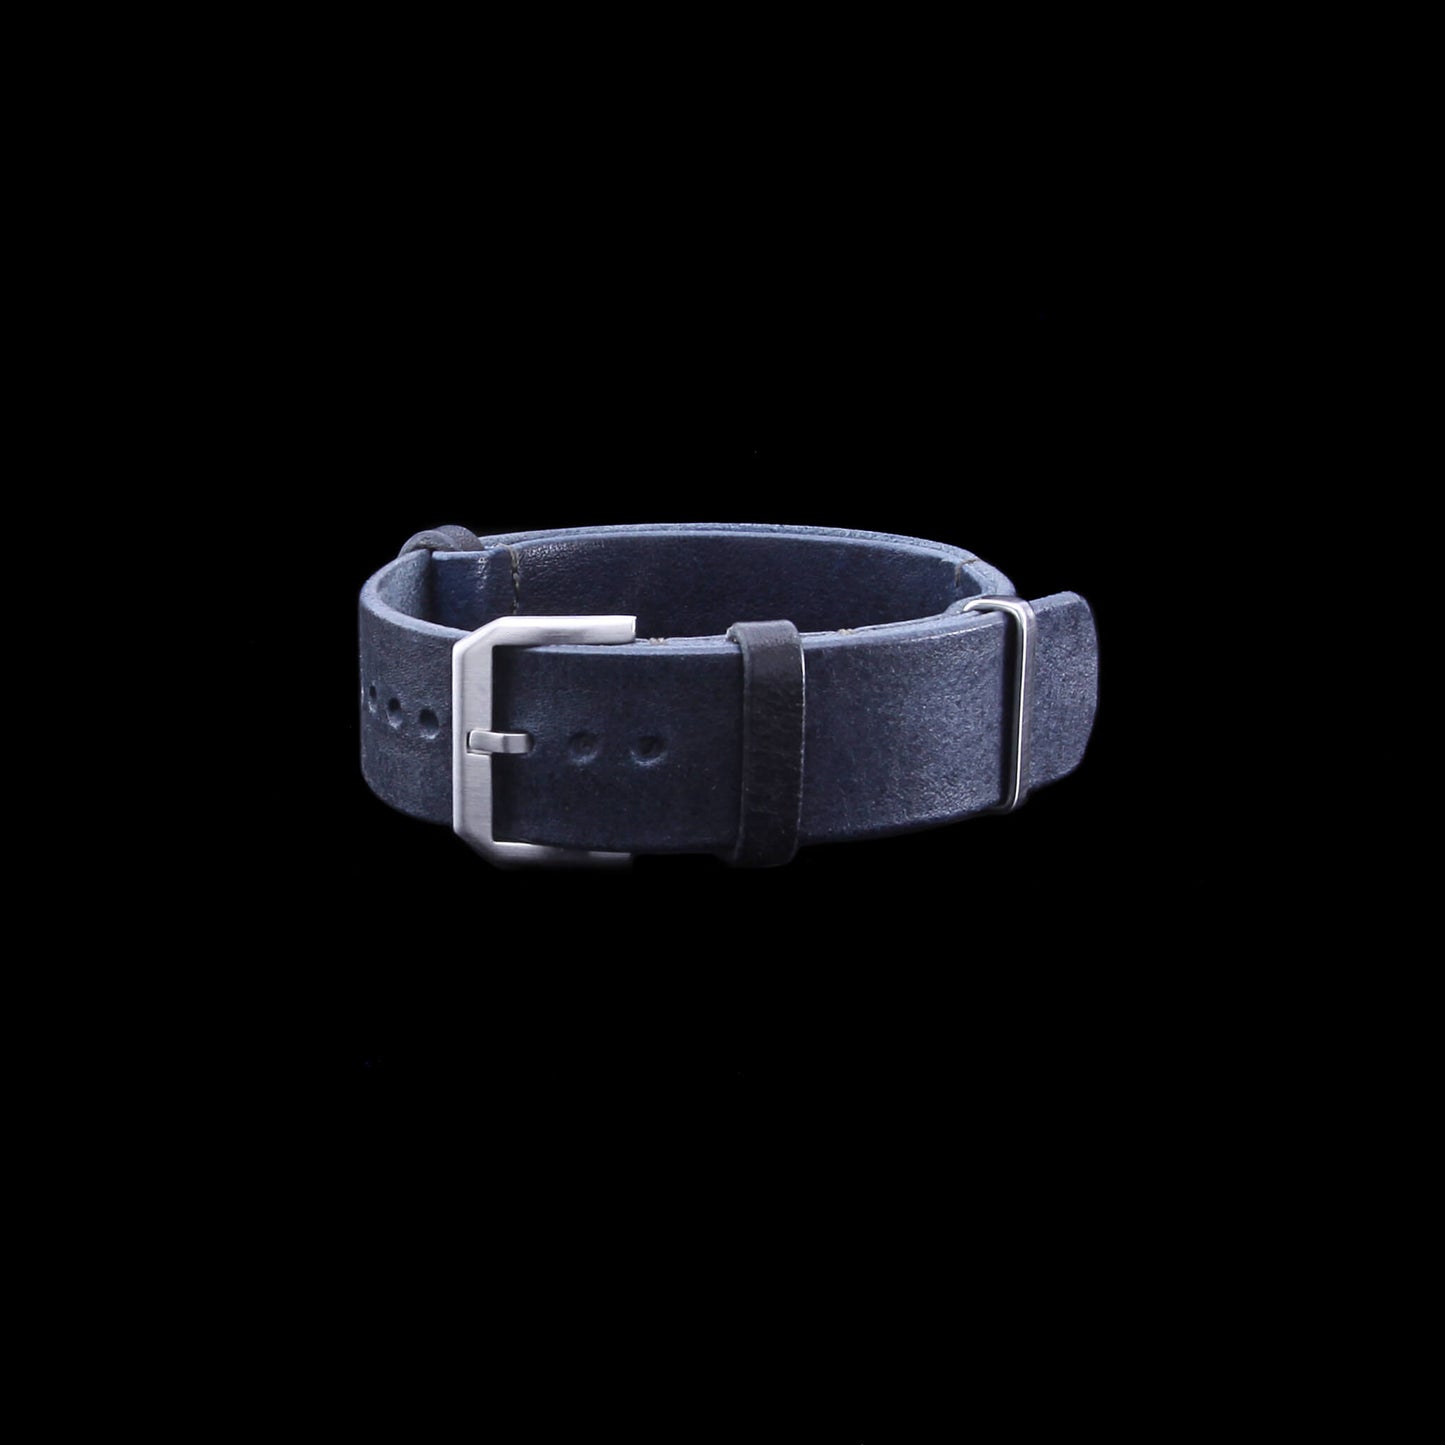 NAT2 Stylish Leather Watch Strap, Vintage 407 navy blue fitted with brushed steel slim buckle , made with full grain Italian veg-tanned leather by Cozy Handmade